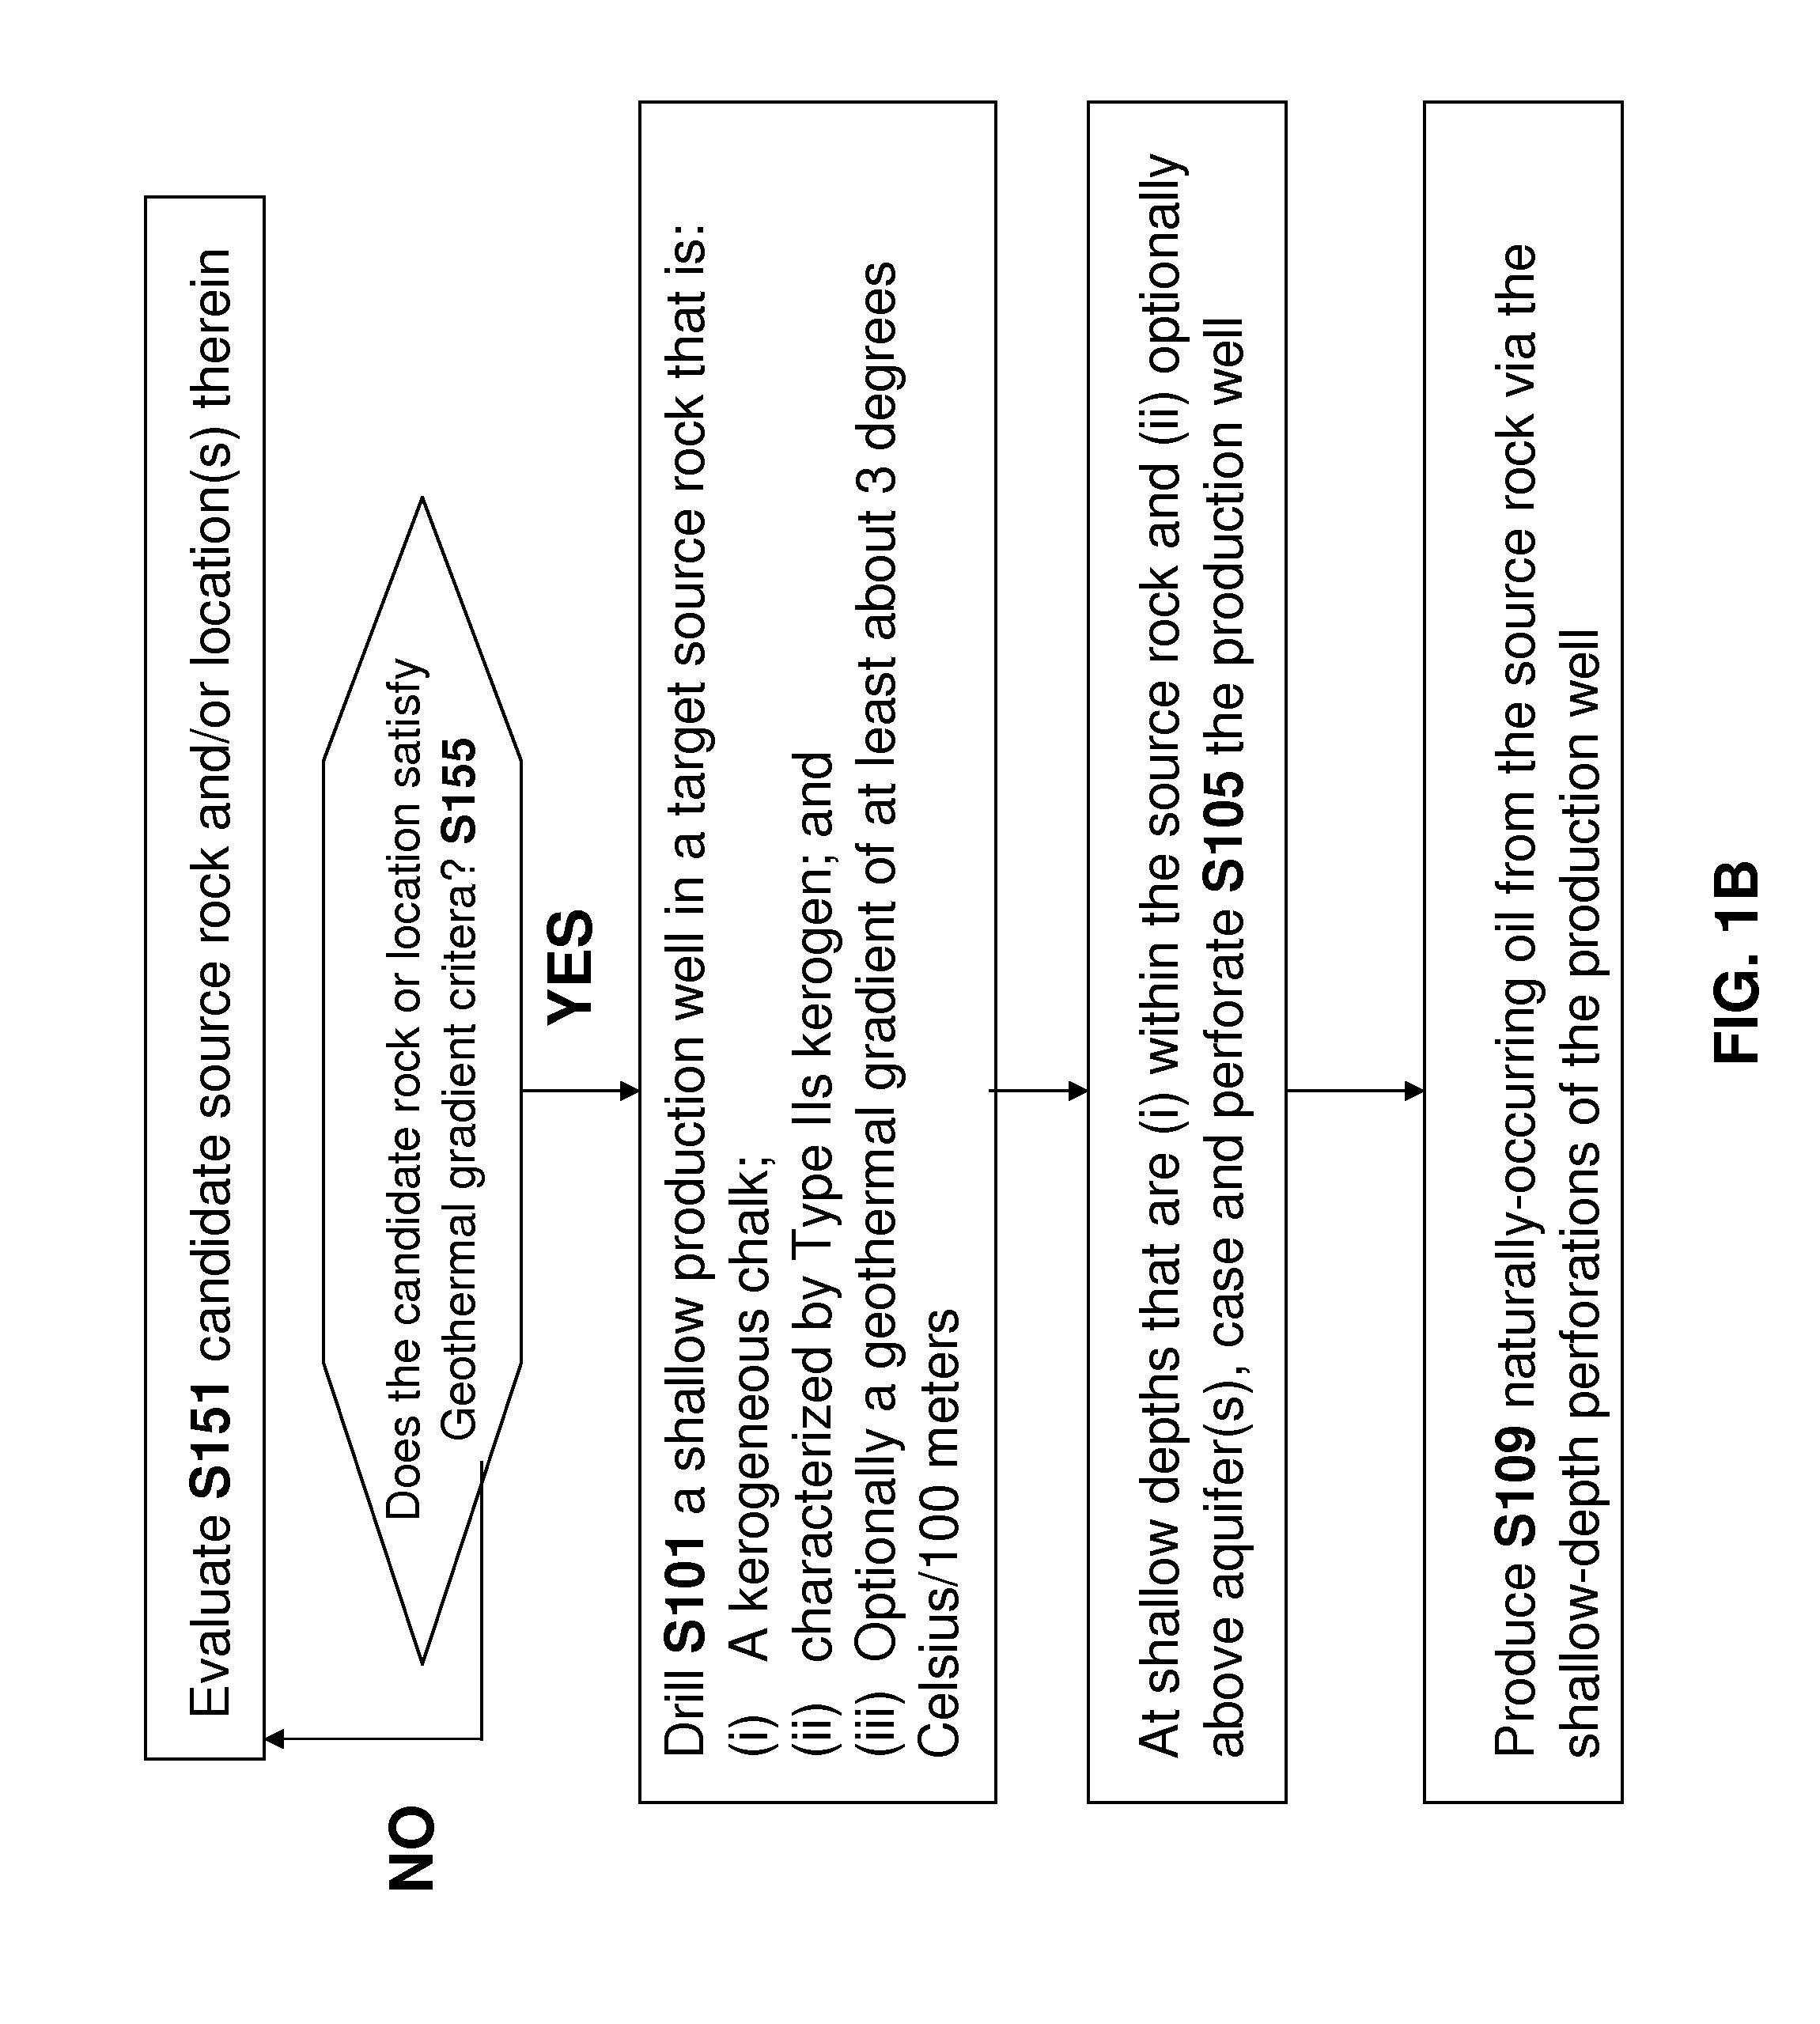 Method and apparatus for producing unconventional oil at shallow depths